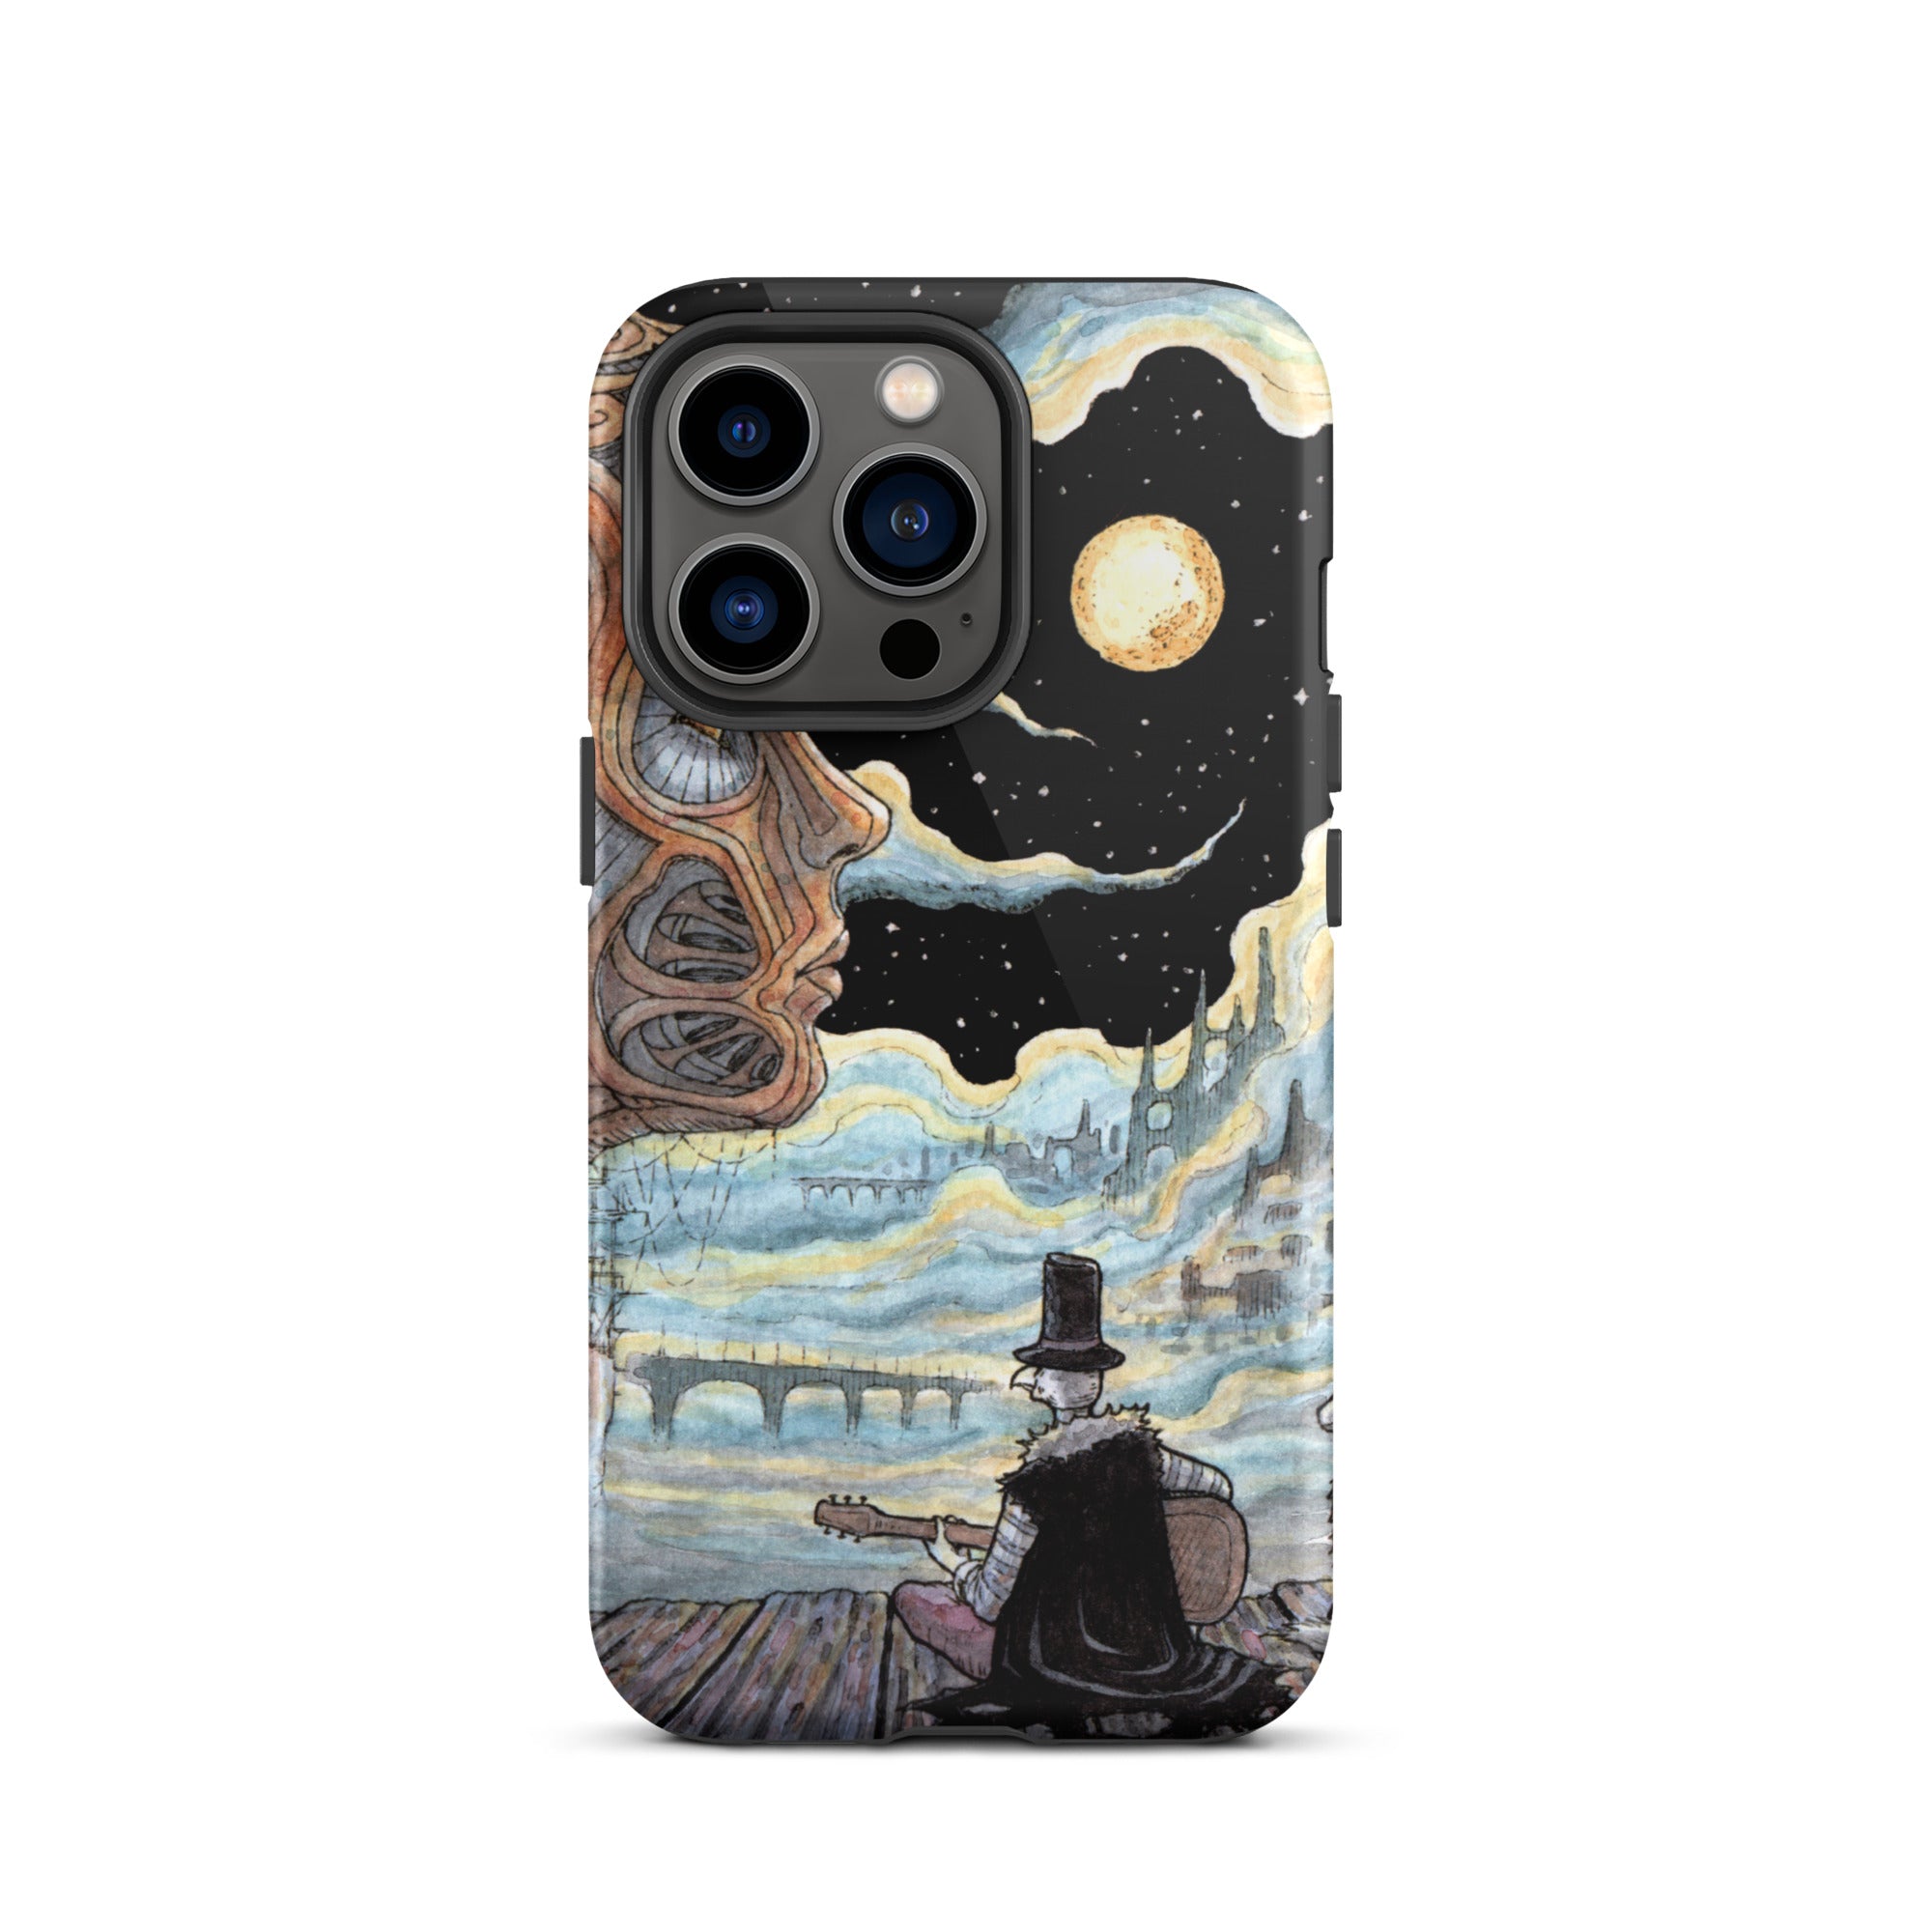 Tough iPhone Case - City In The Clouds